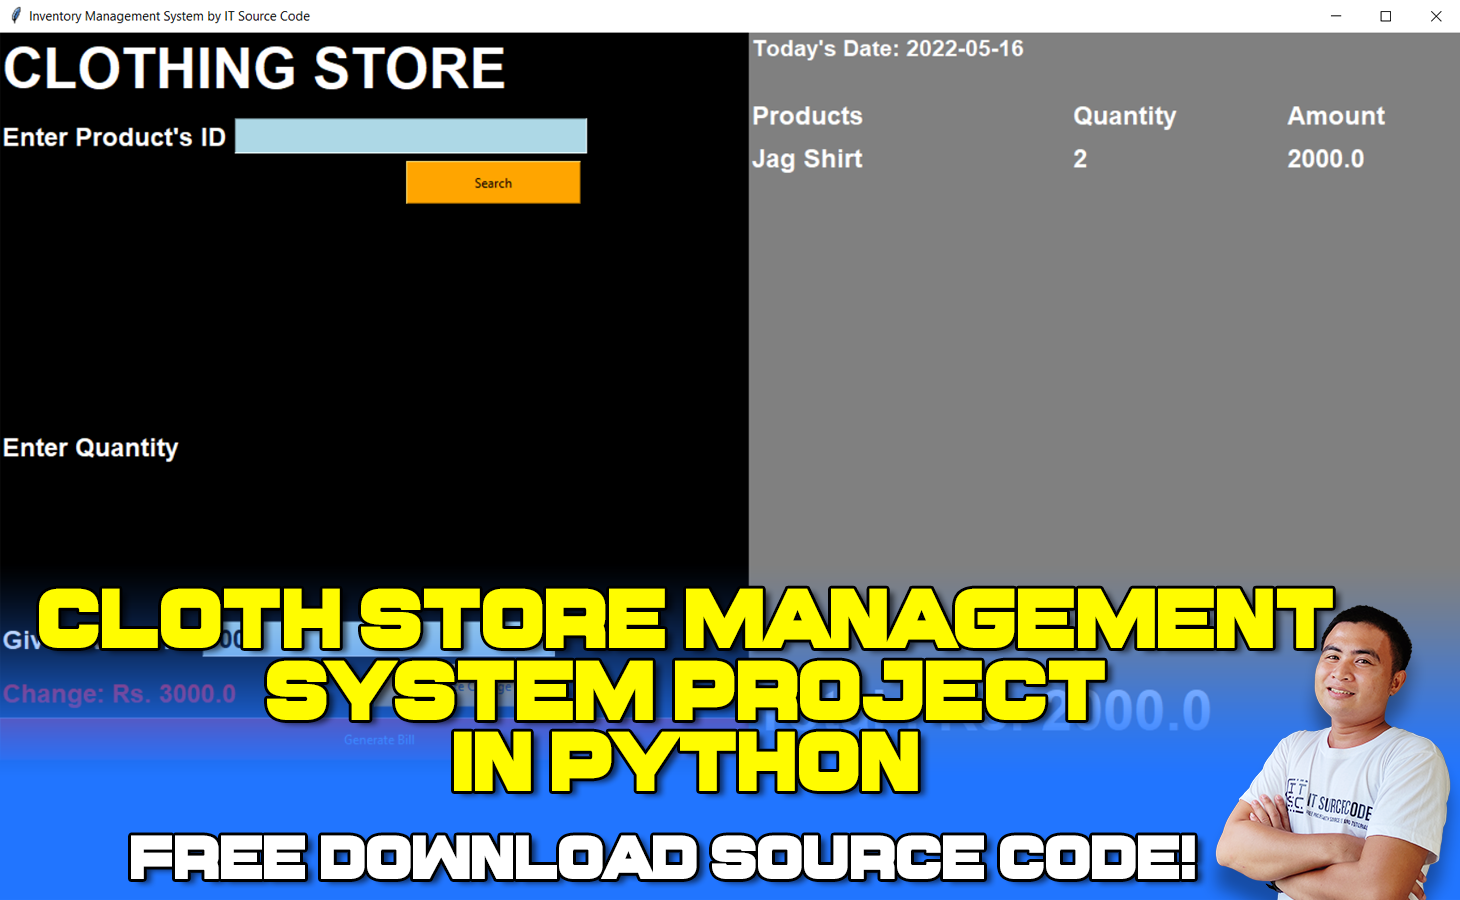 Cloth Store Management System Project in Python with Source Code